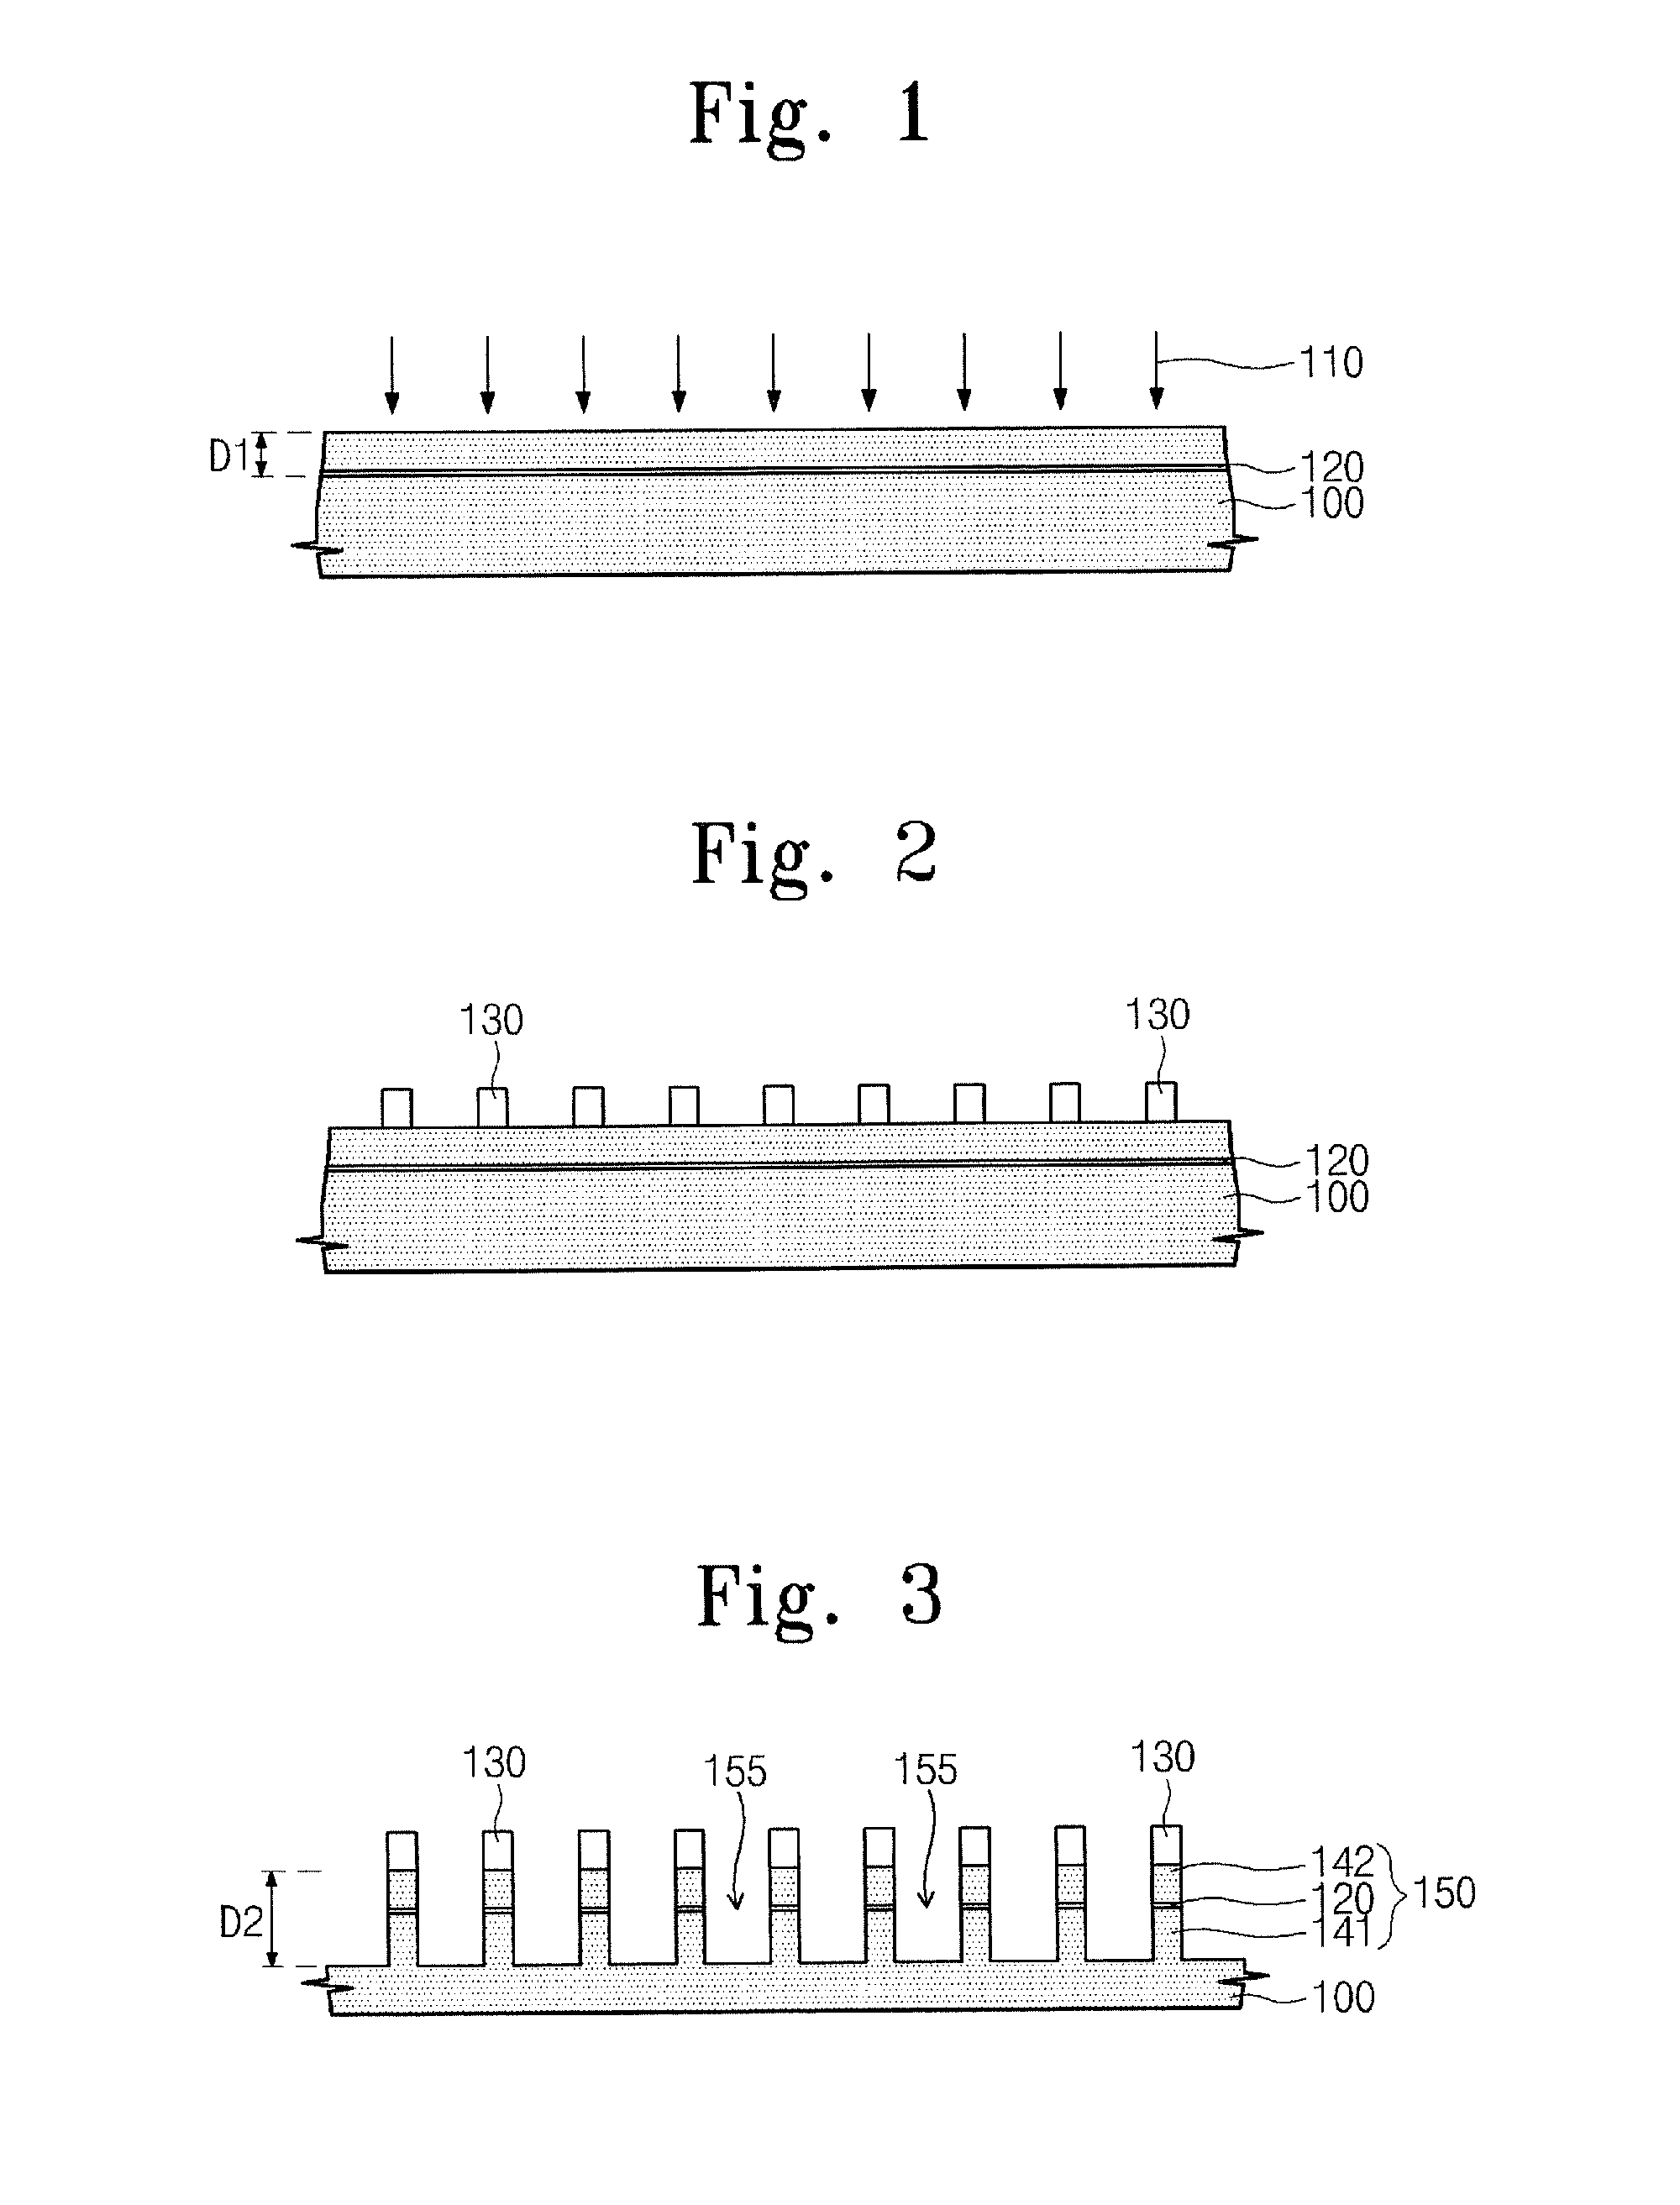 Method of fabricating semiconductor wafer